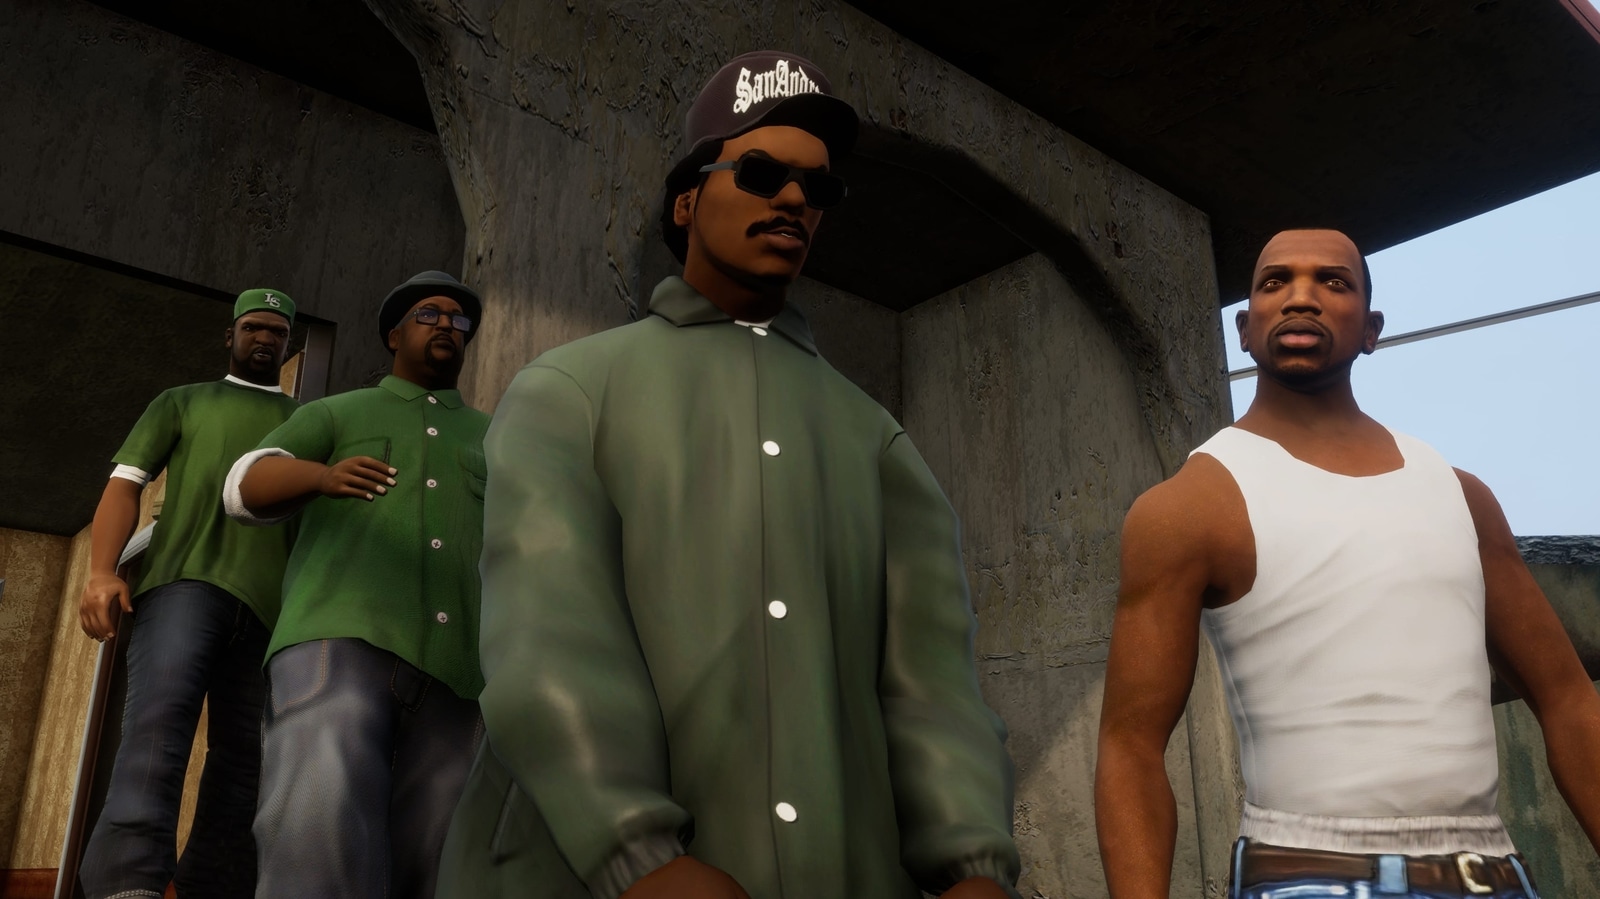 GTA Trilogy Owners Can Claim a Free Game, but Only on PC